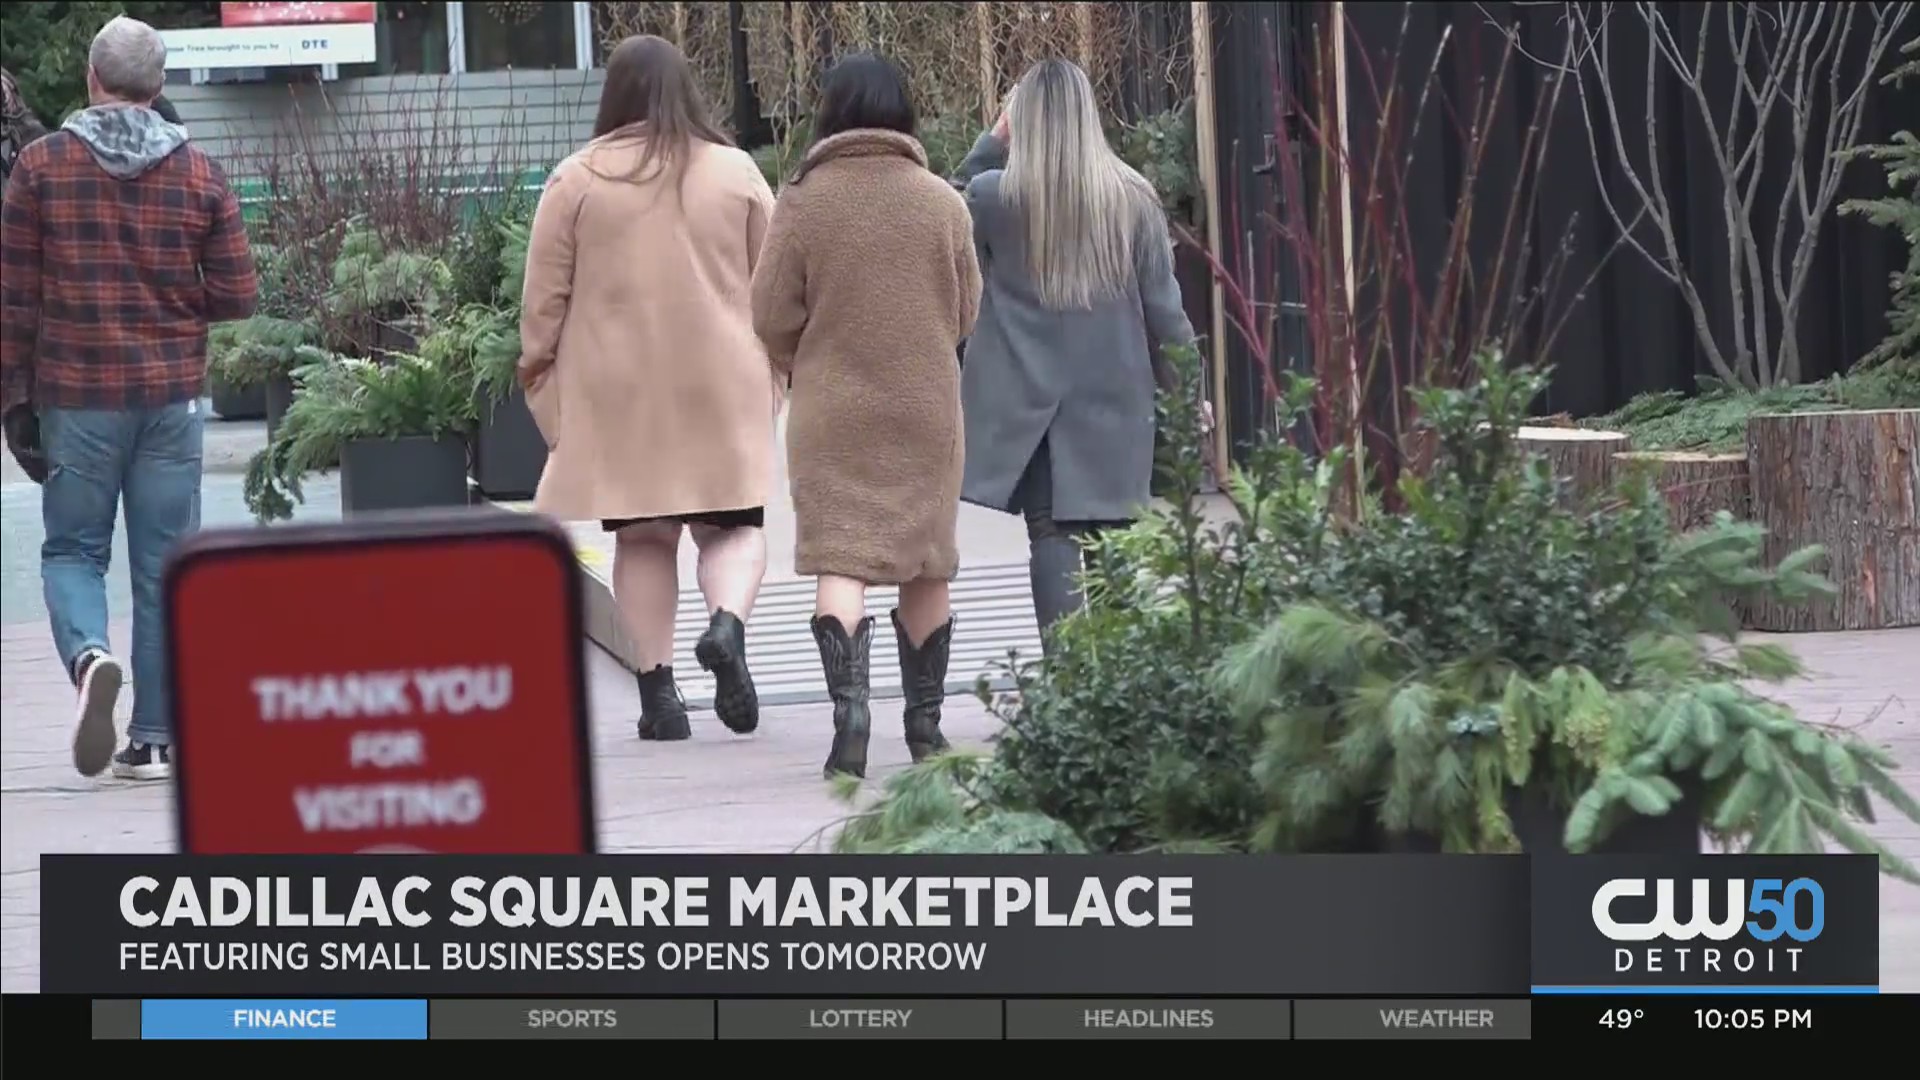 Cadillac Square Marketplace Featuring Local Small Businesses Opens November 10-December 31